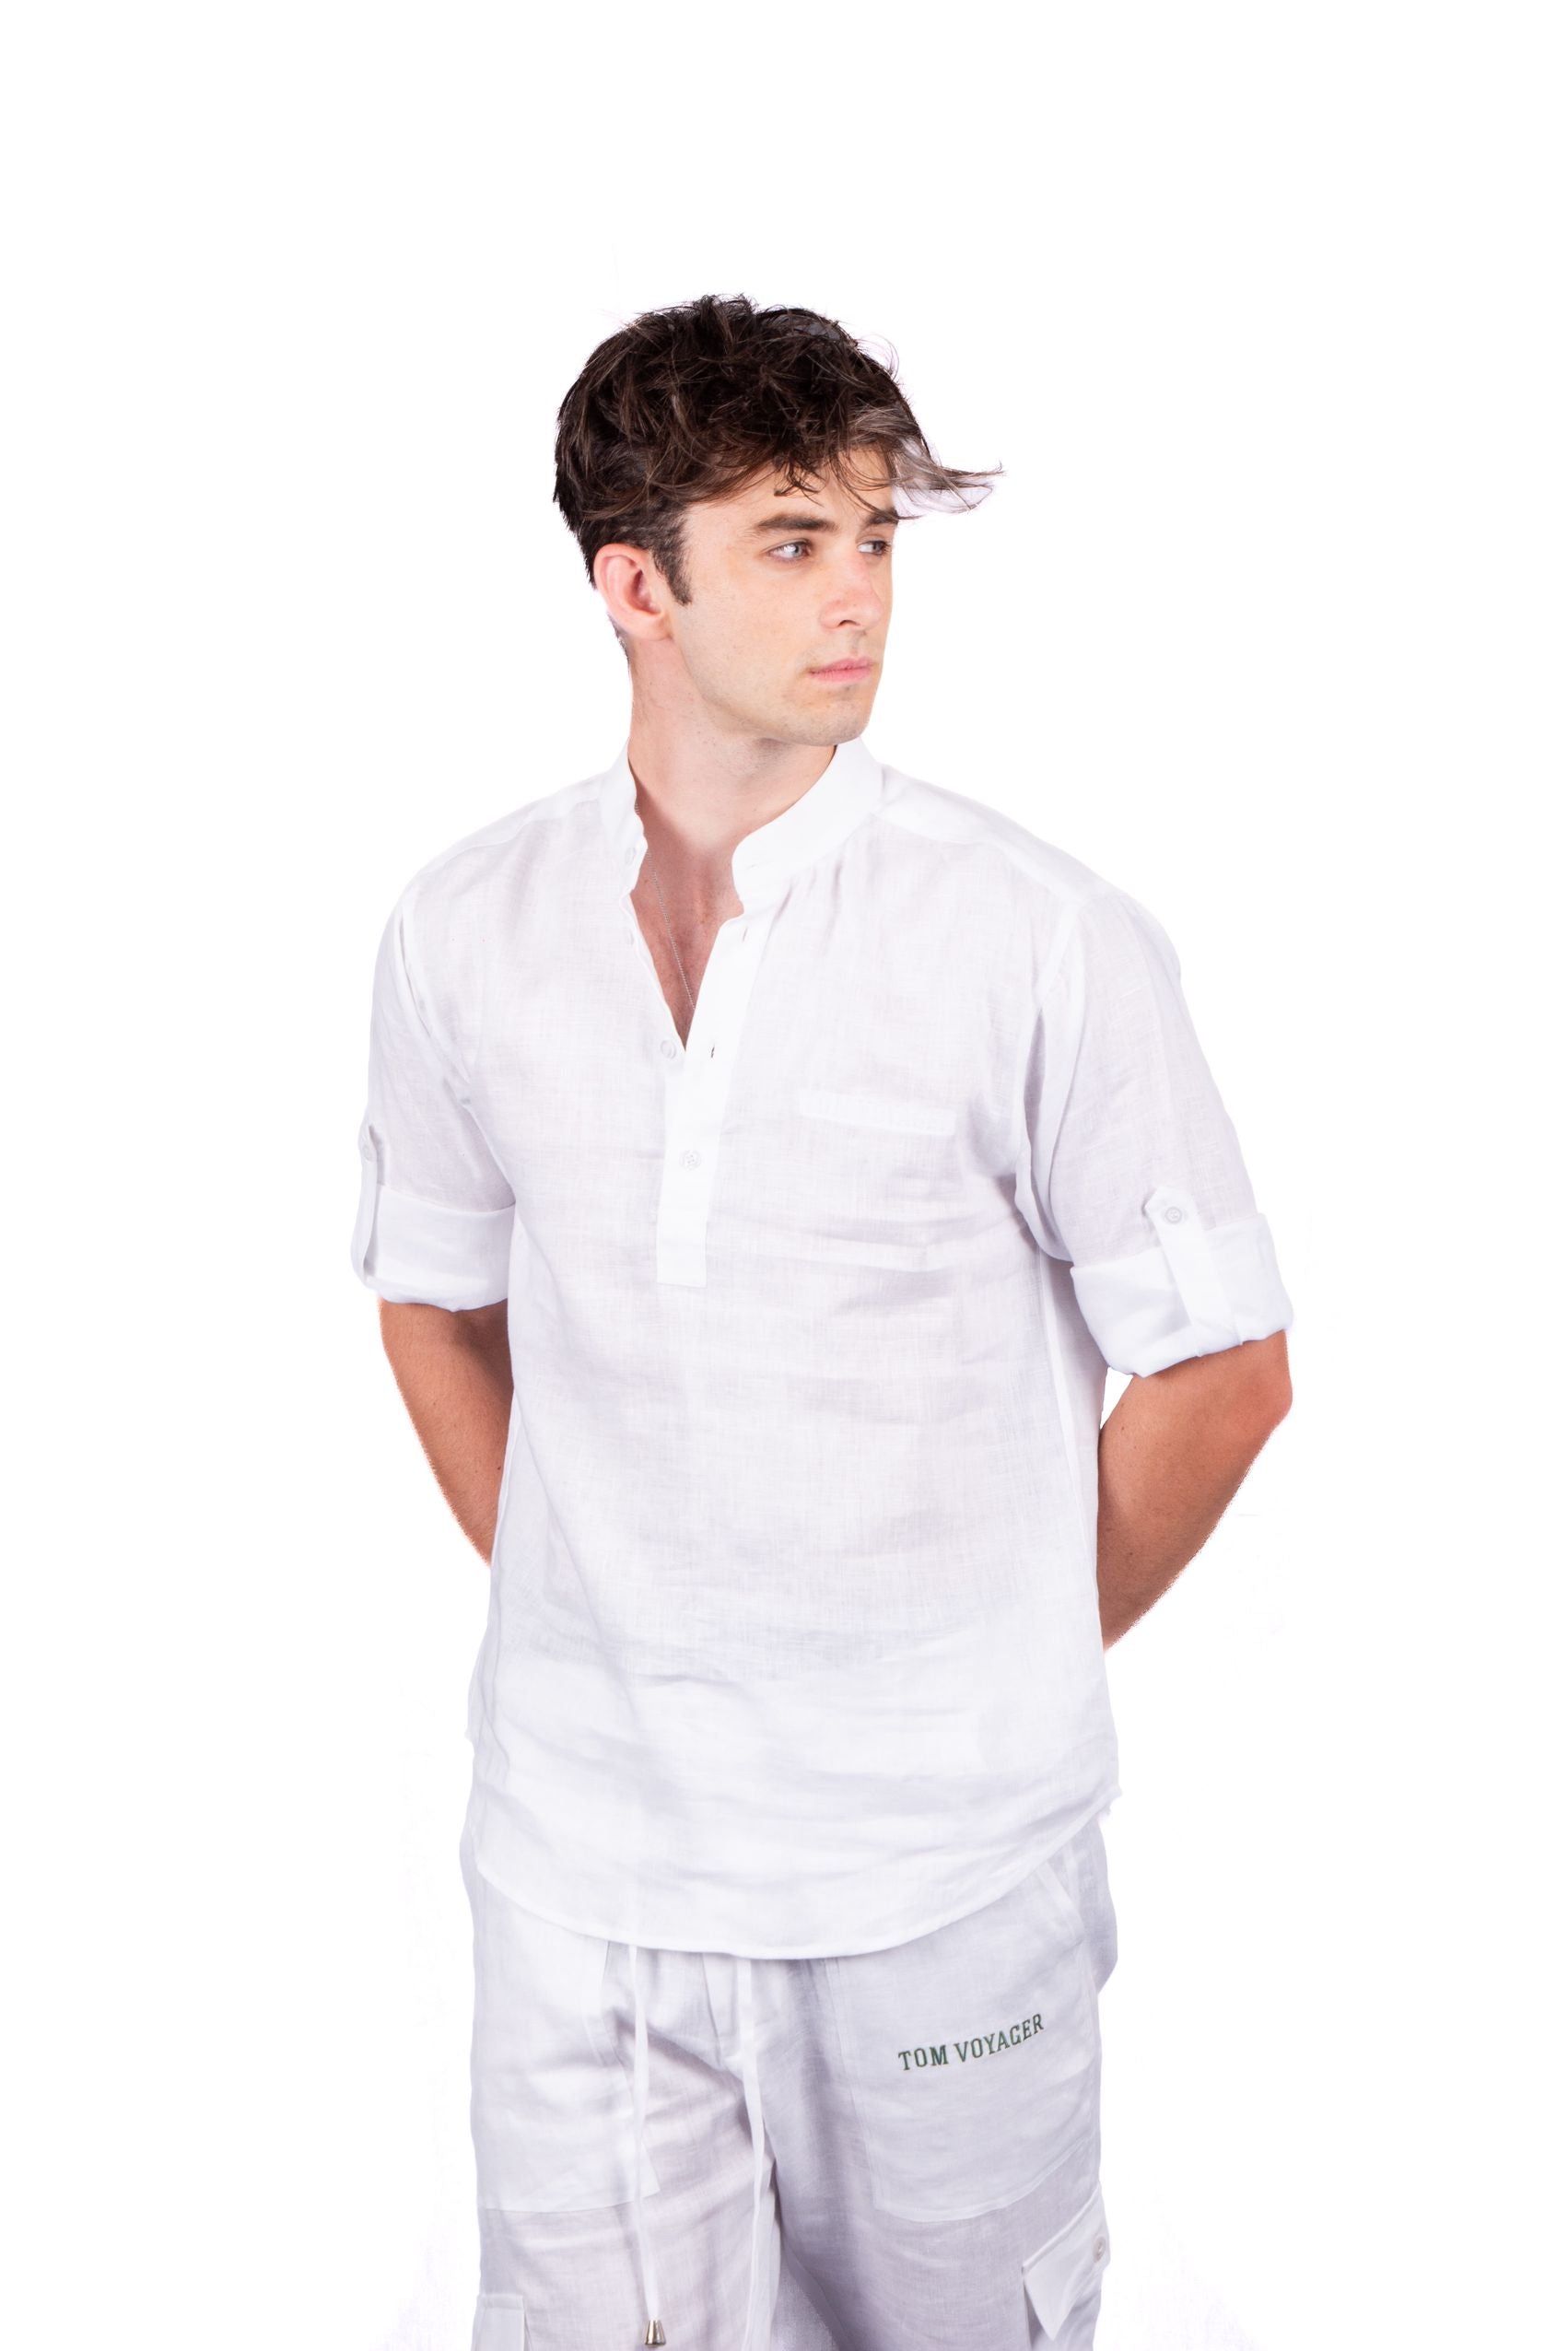 Flush mens linen shirt - linen shirt - white -stylish and perfect for every occassion